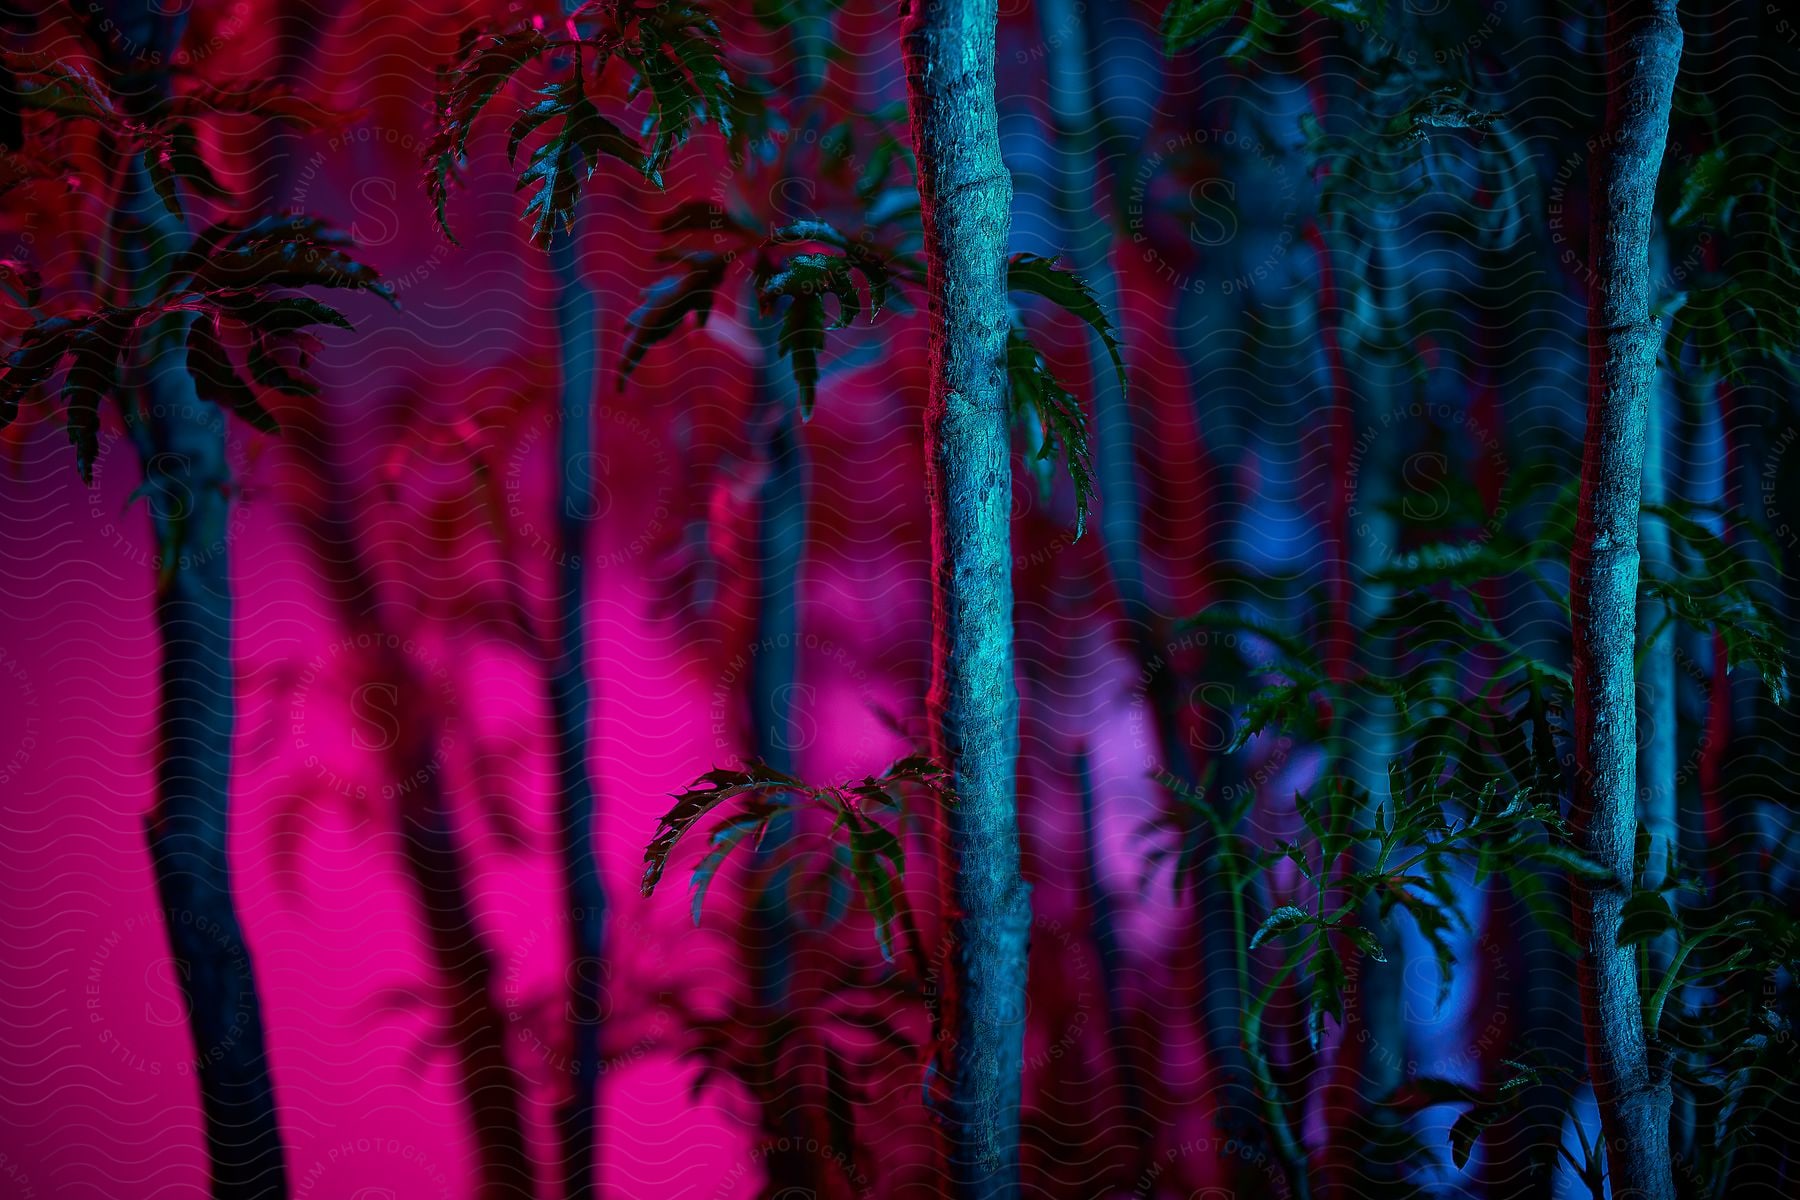 A nighttime landscape with purple and pink hues featuring grass twigs and a tree trunk